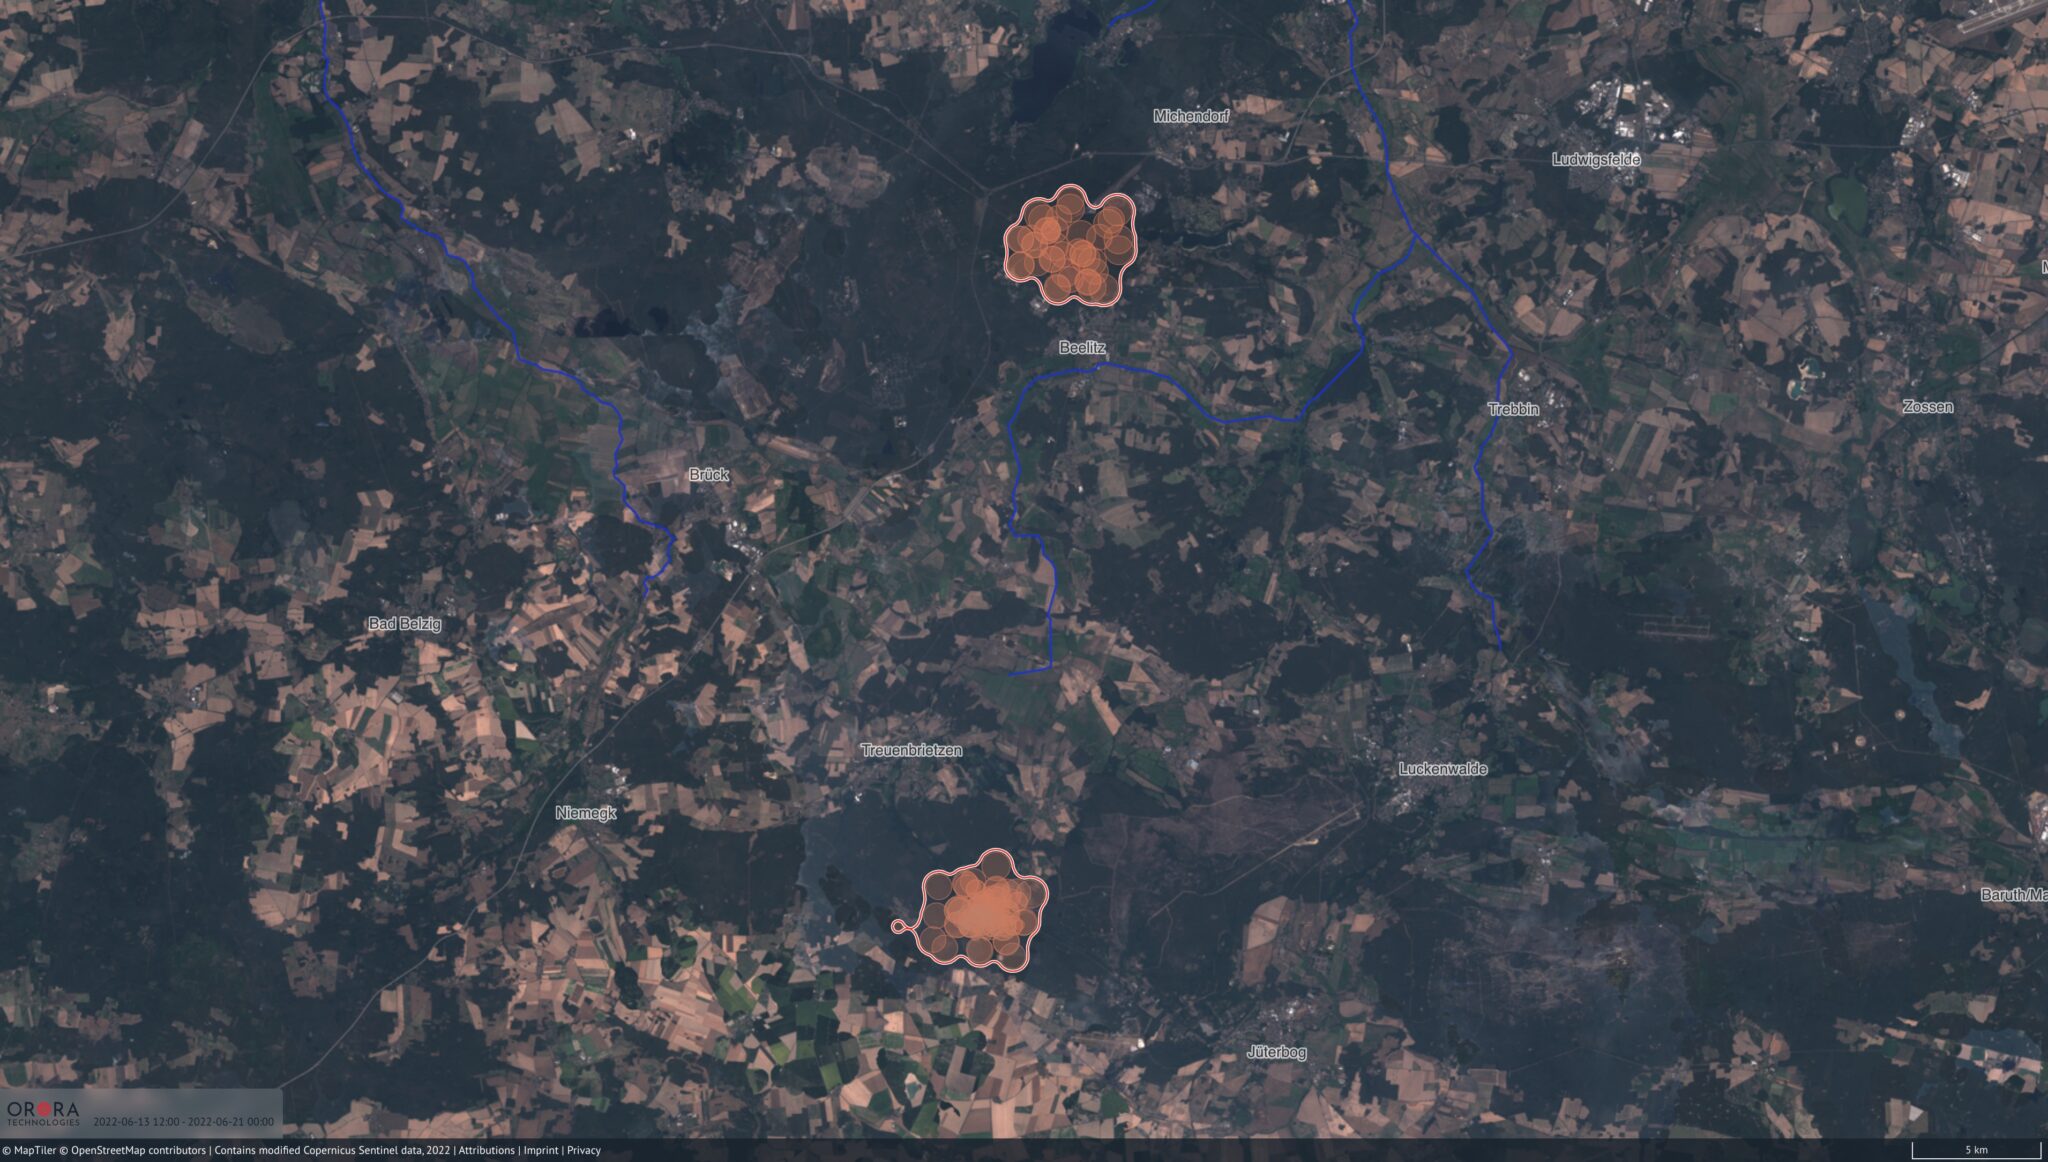 two-hotspots-detected-in-brandenburg-through-ororatech-wildfire-service